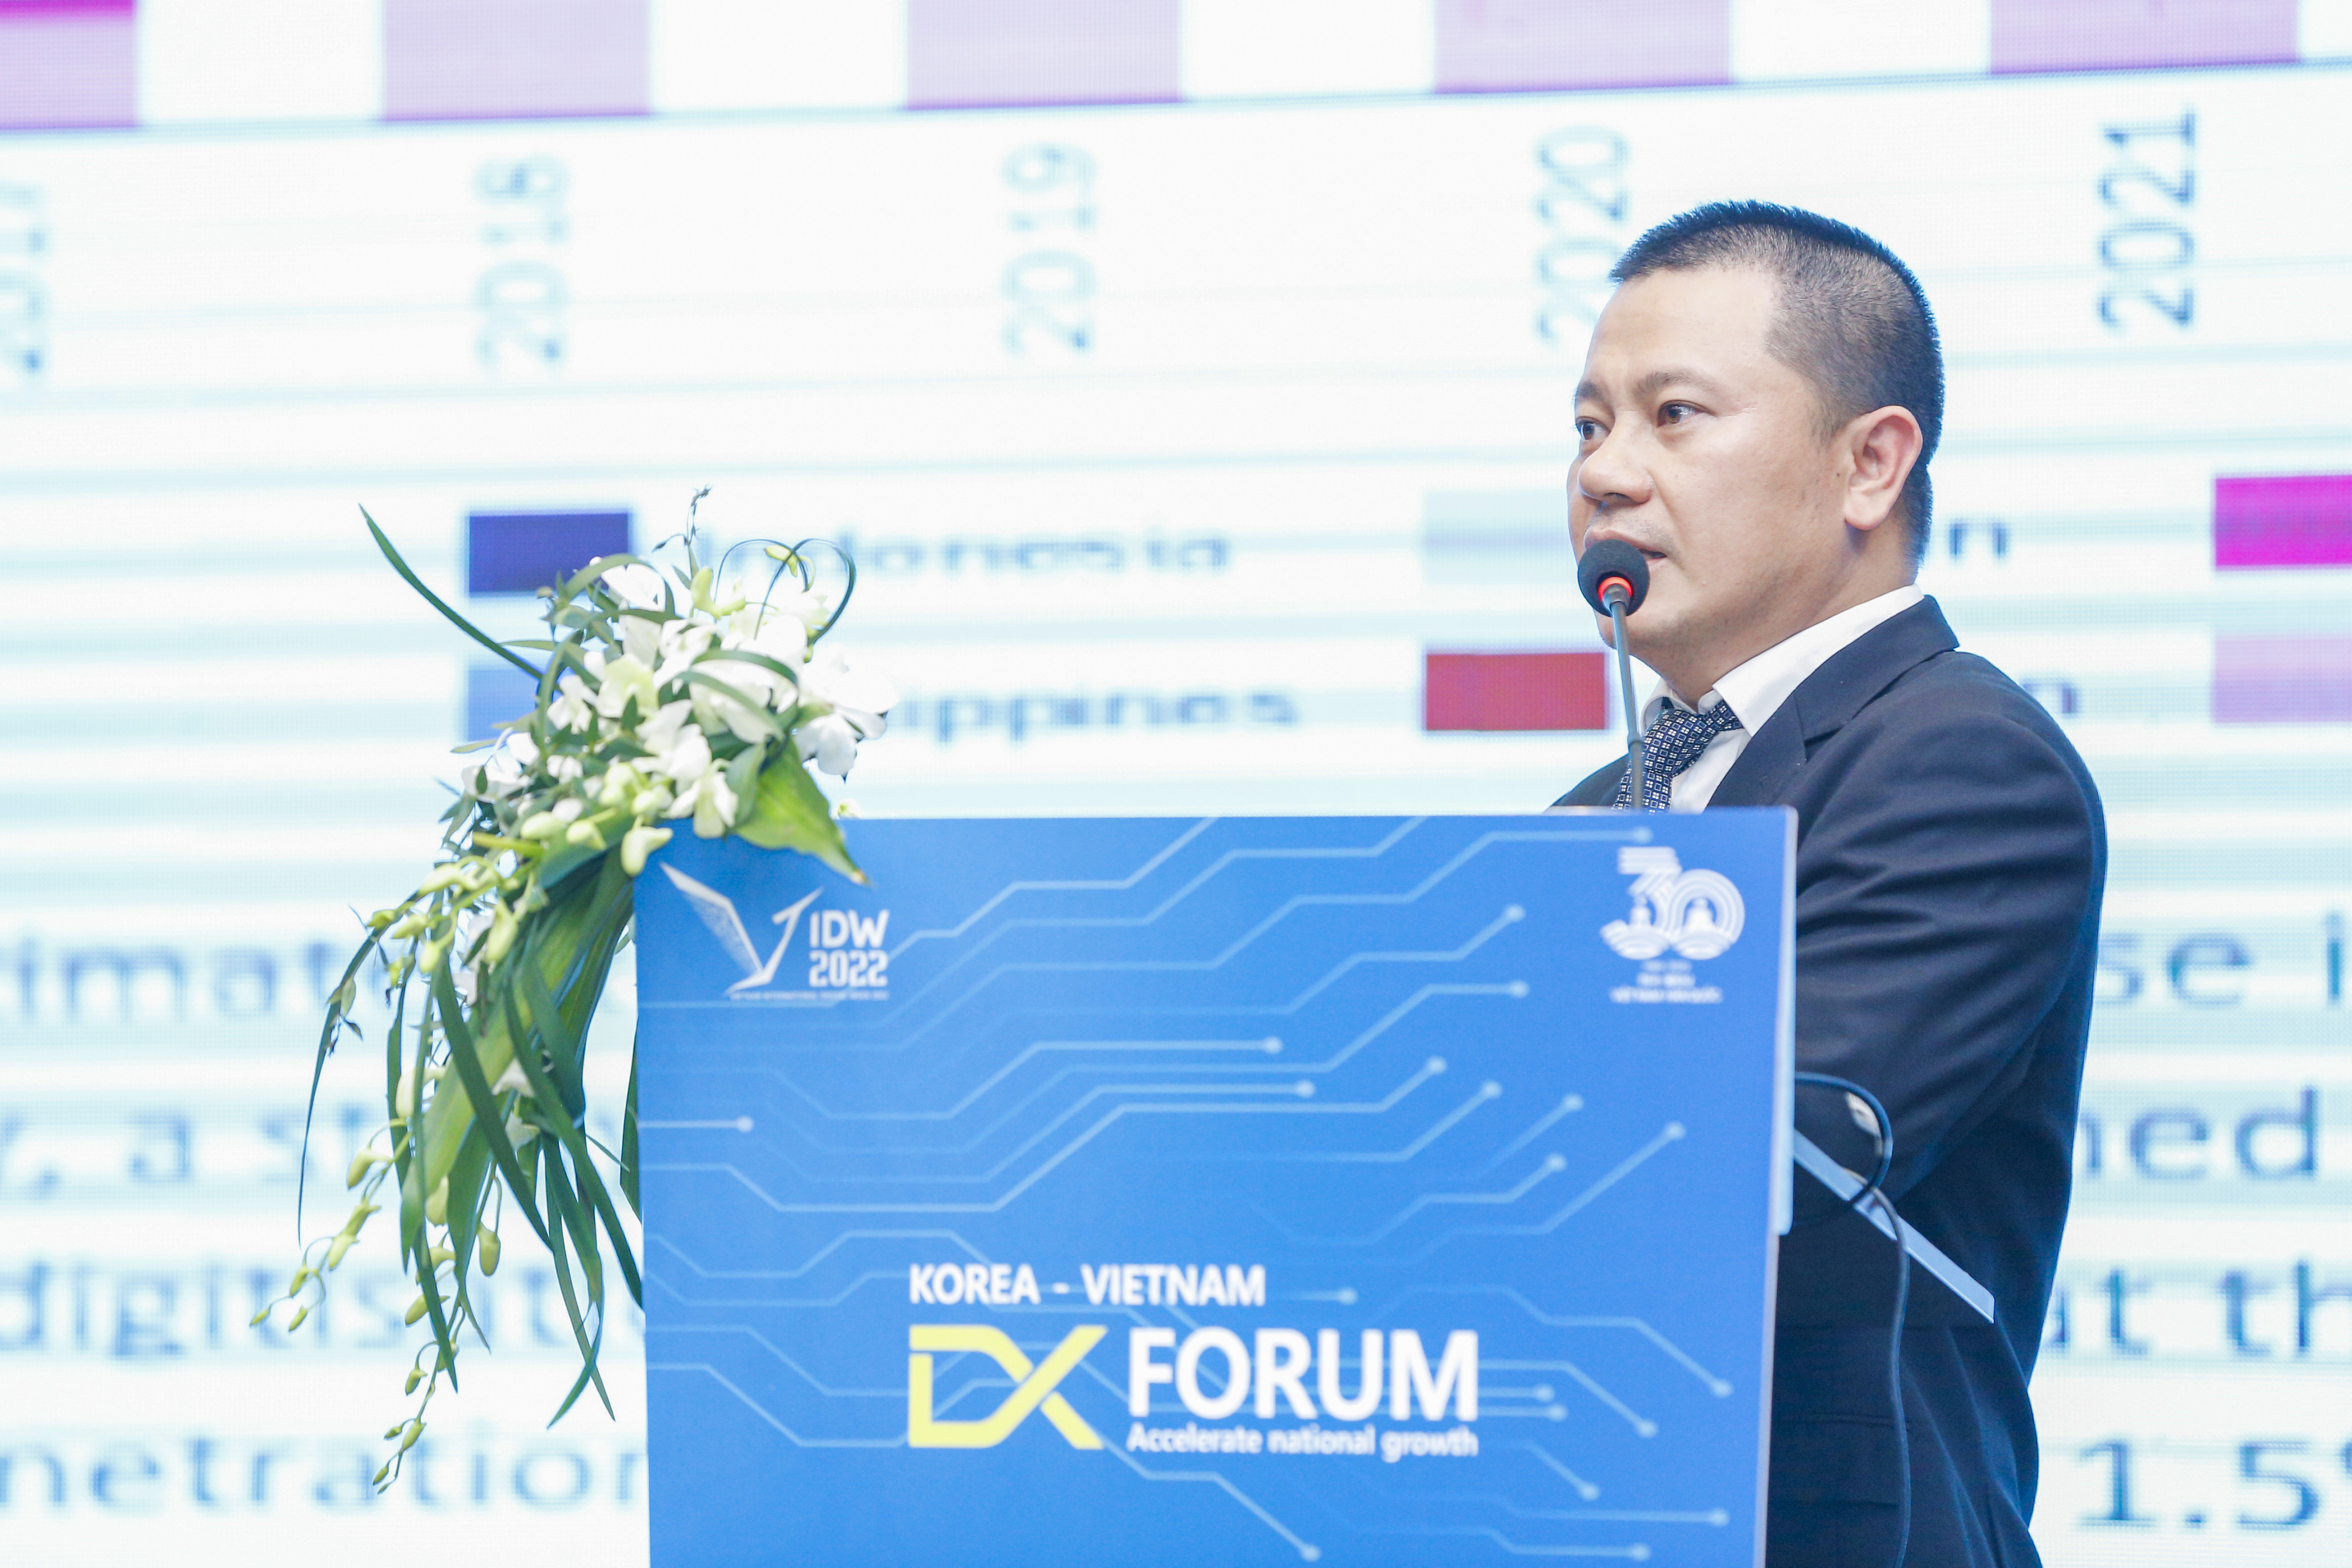 Vietnam has all important elements to become a Digital Hub